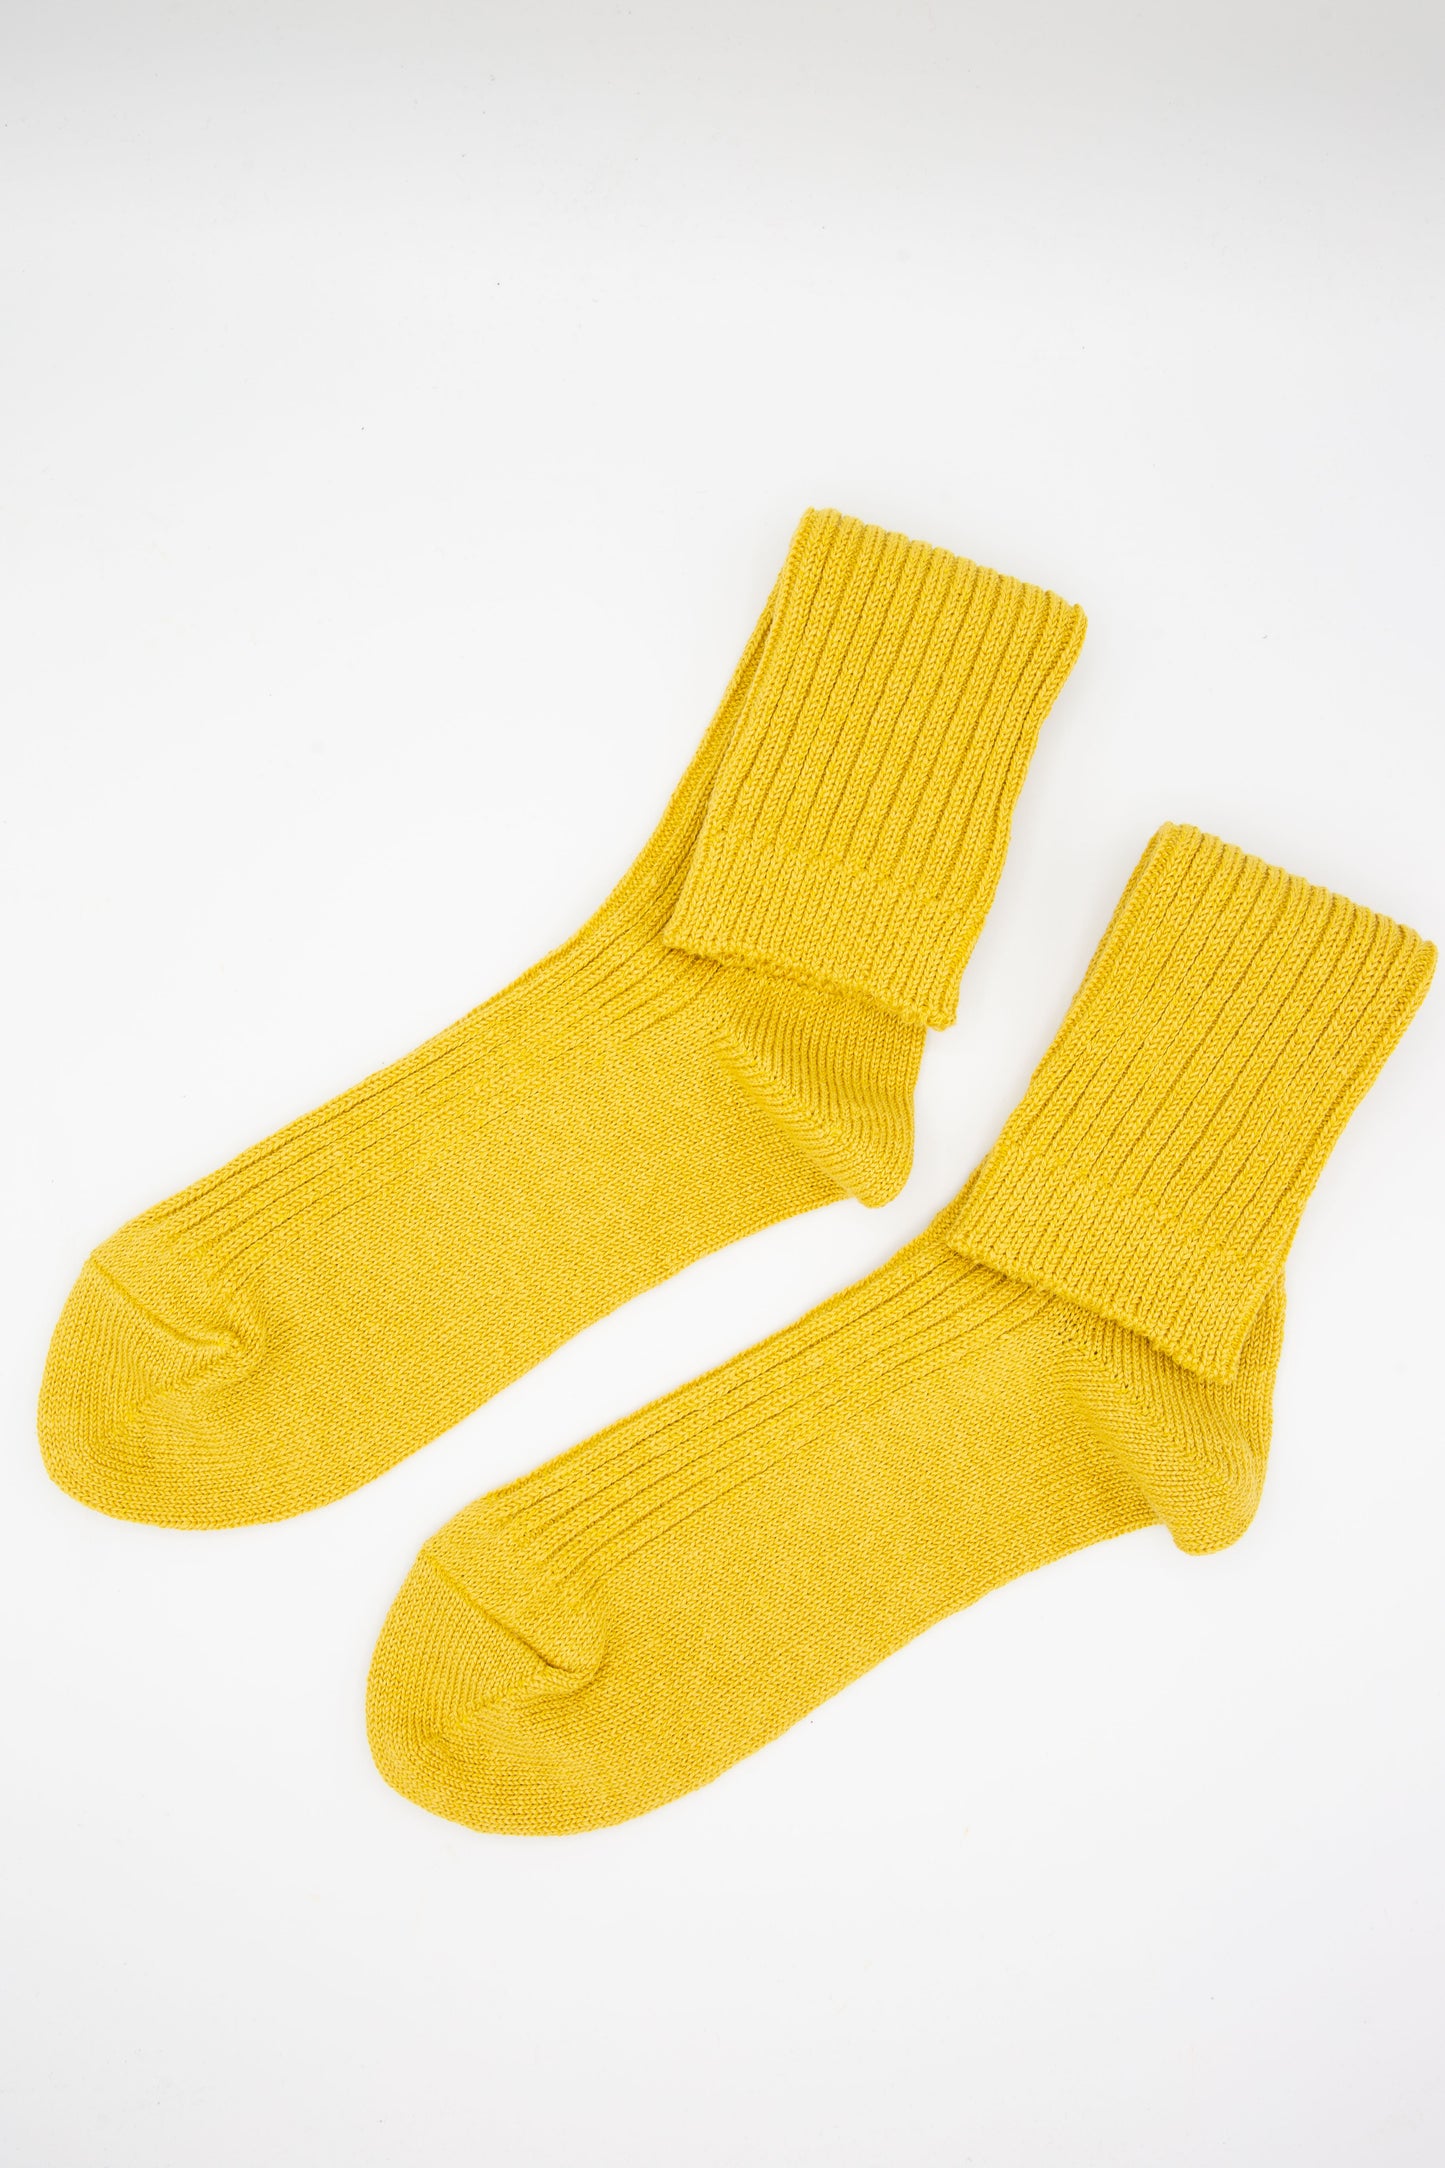 A pair of Ichi Antiquités Linen Rib Sock in Yellow ankle socks on a white background.